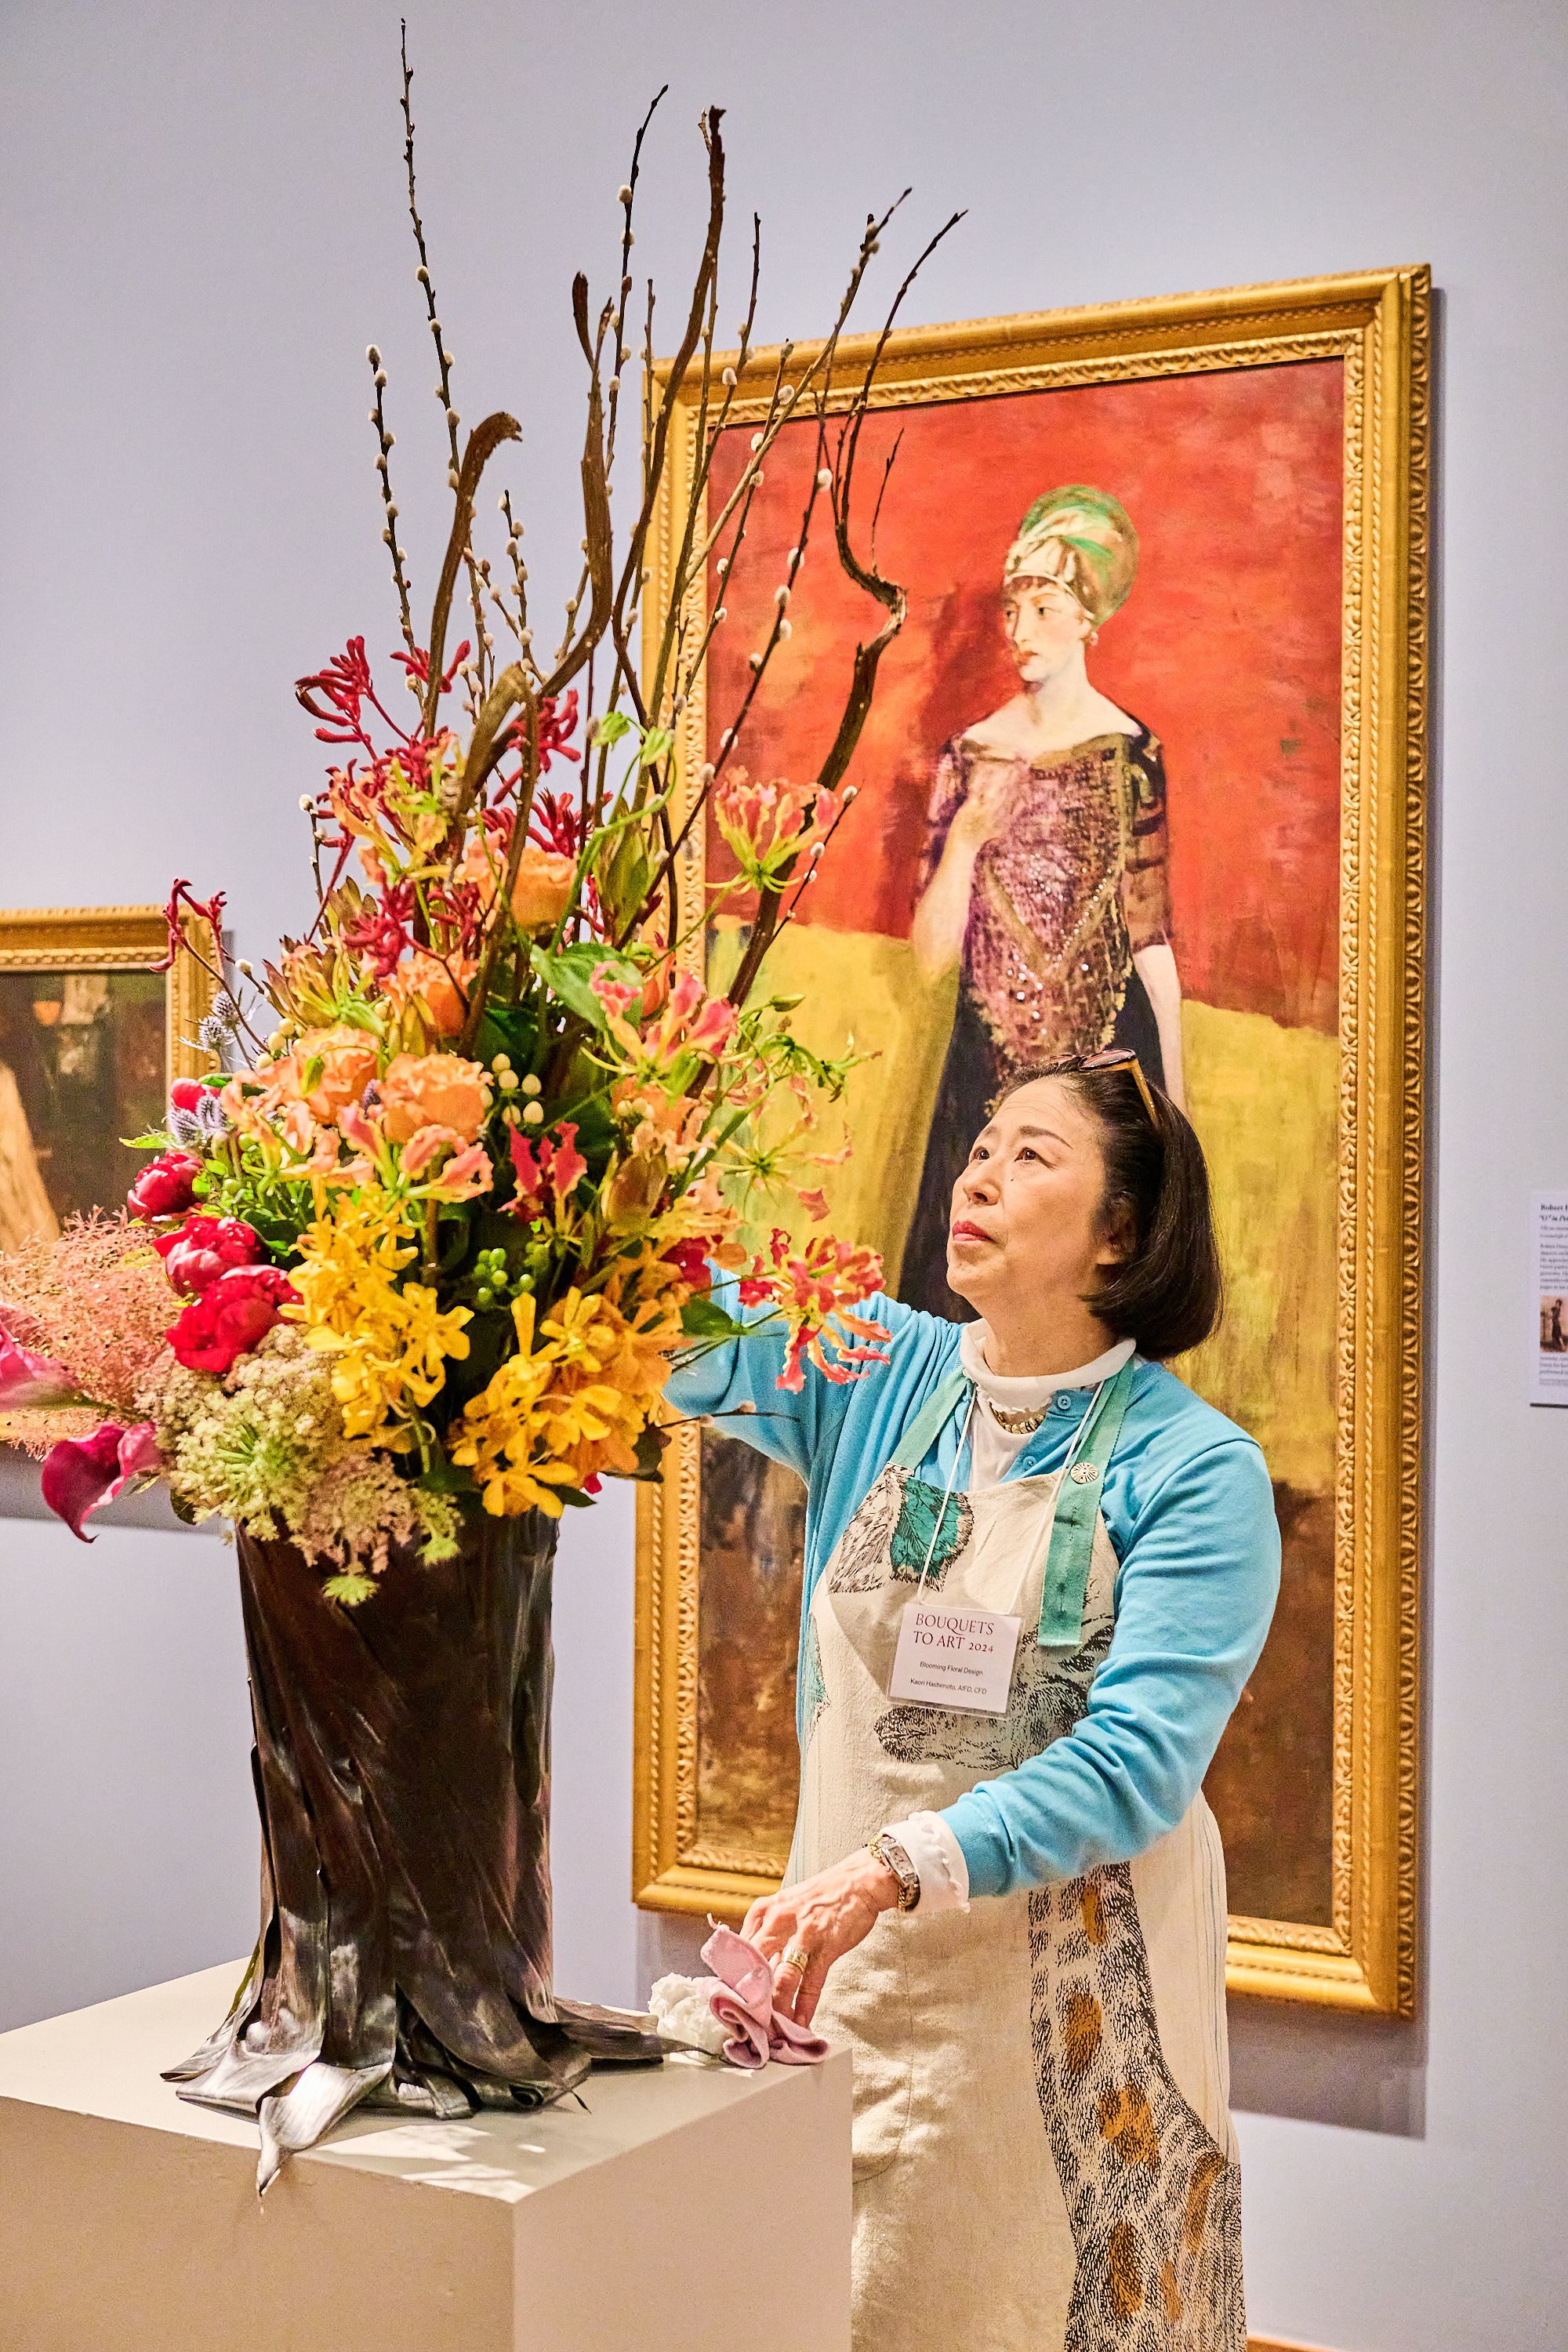 A woman arranges a vibrant bouquet of flowers. She wears an apron and stands in front of a large framed painting of a woman in a red and yellow dress.